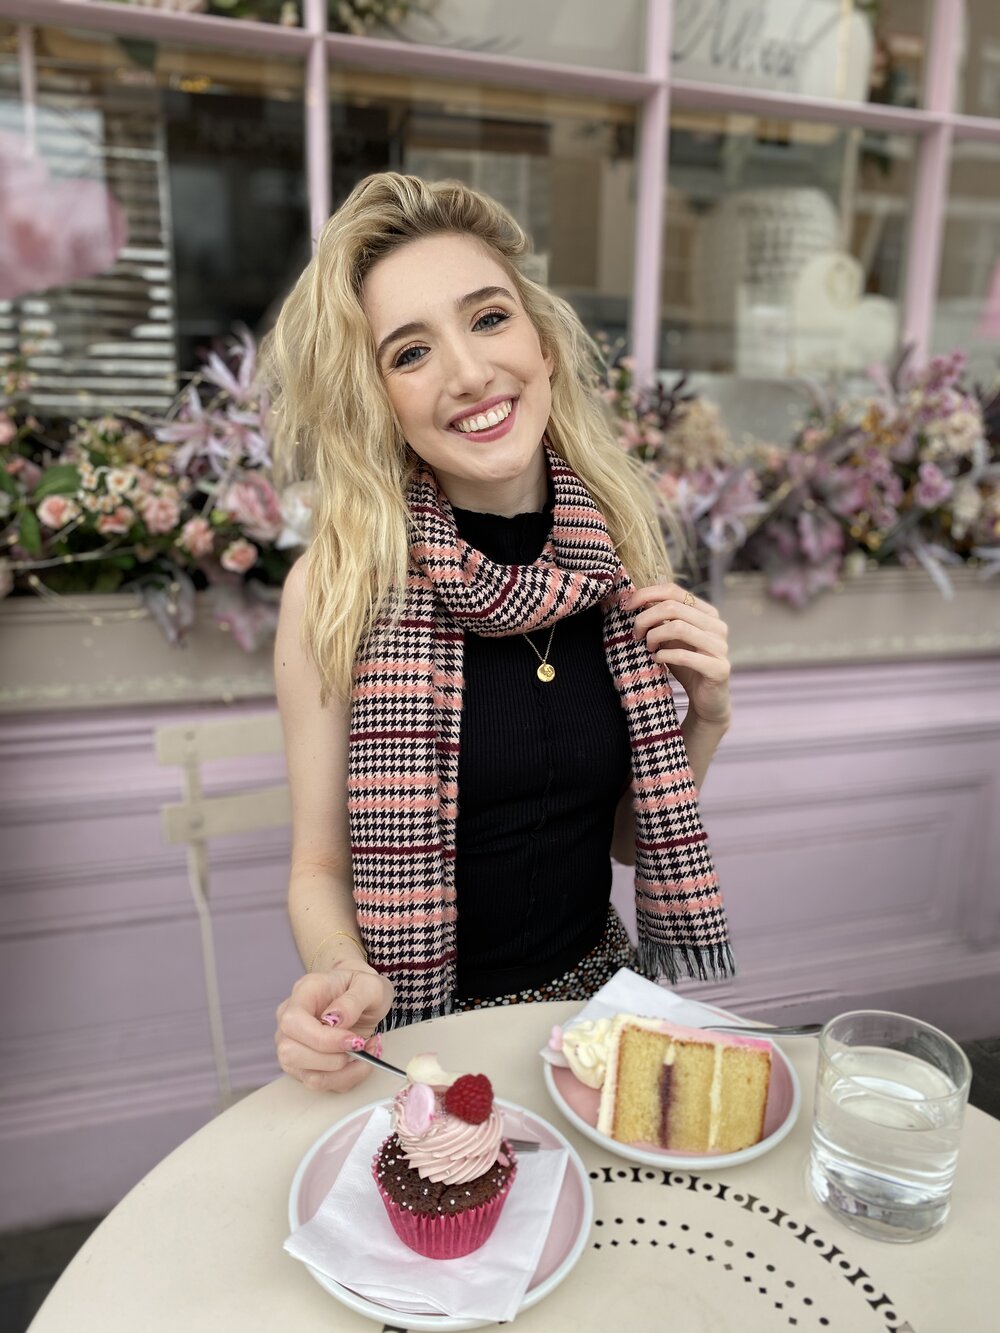 Mollie out with a friend for afternoon tea. Photo: Mollie Davies